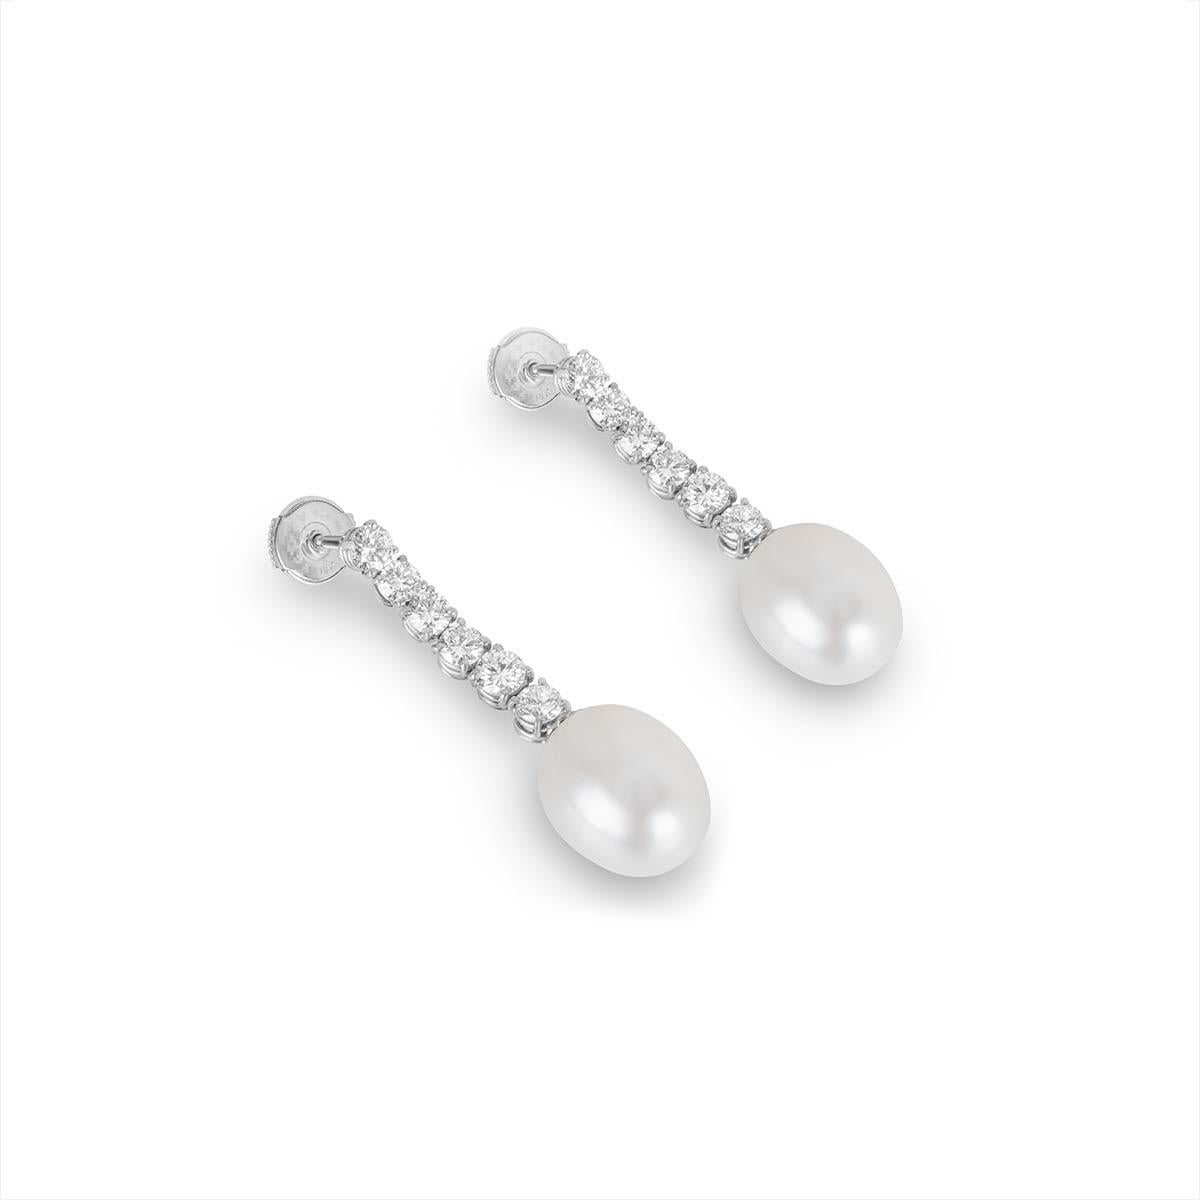 A luxurious pair of 18k white gold diamond and pearl drop earrings. The earrings feature 6 round brilliant cut diamonds set vertically, totalling approximately 1.90ct, predominantly G-F colour and VS2 clarity. Complementing the diamonds are two